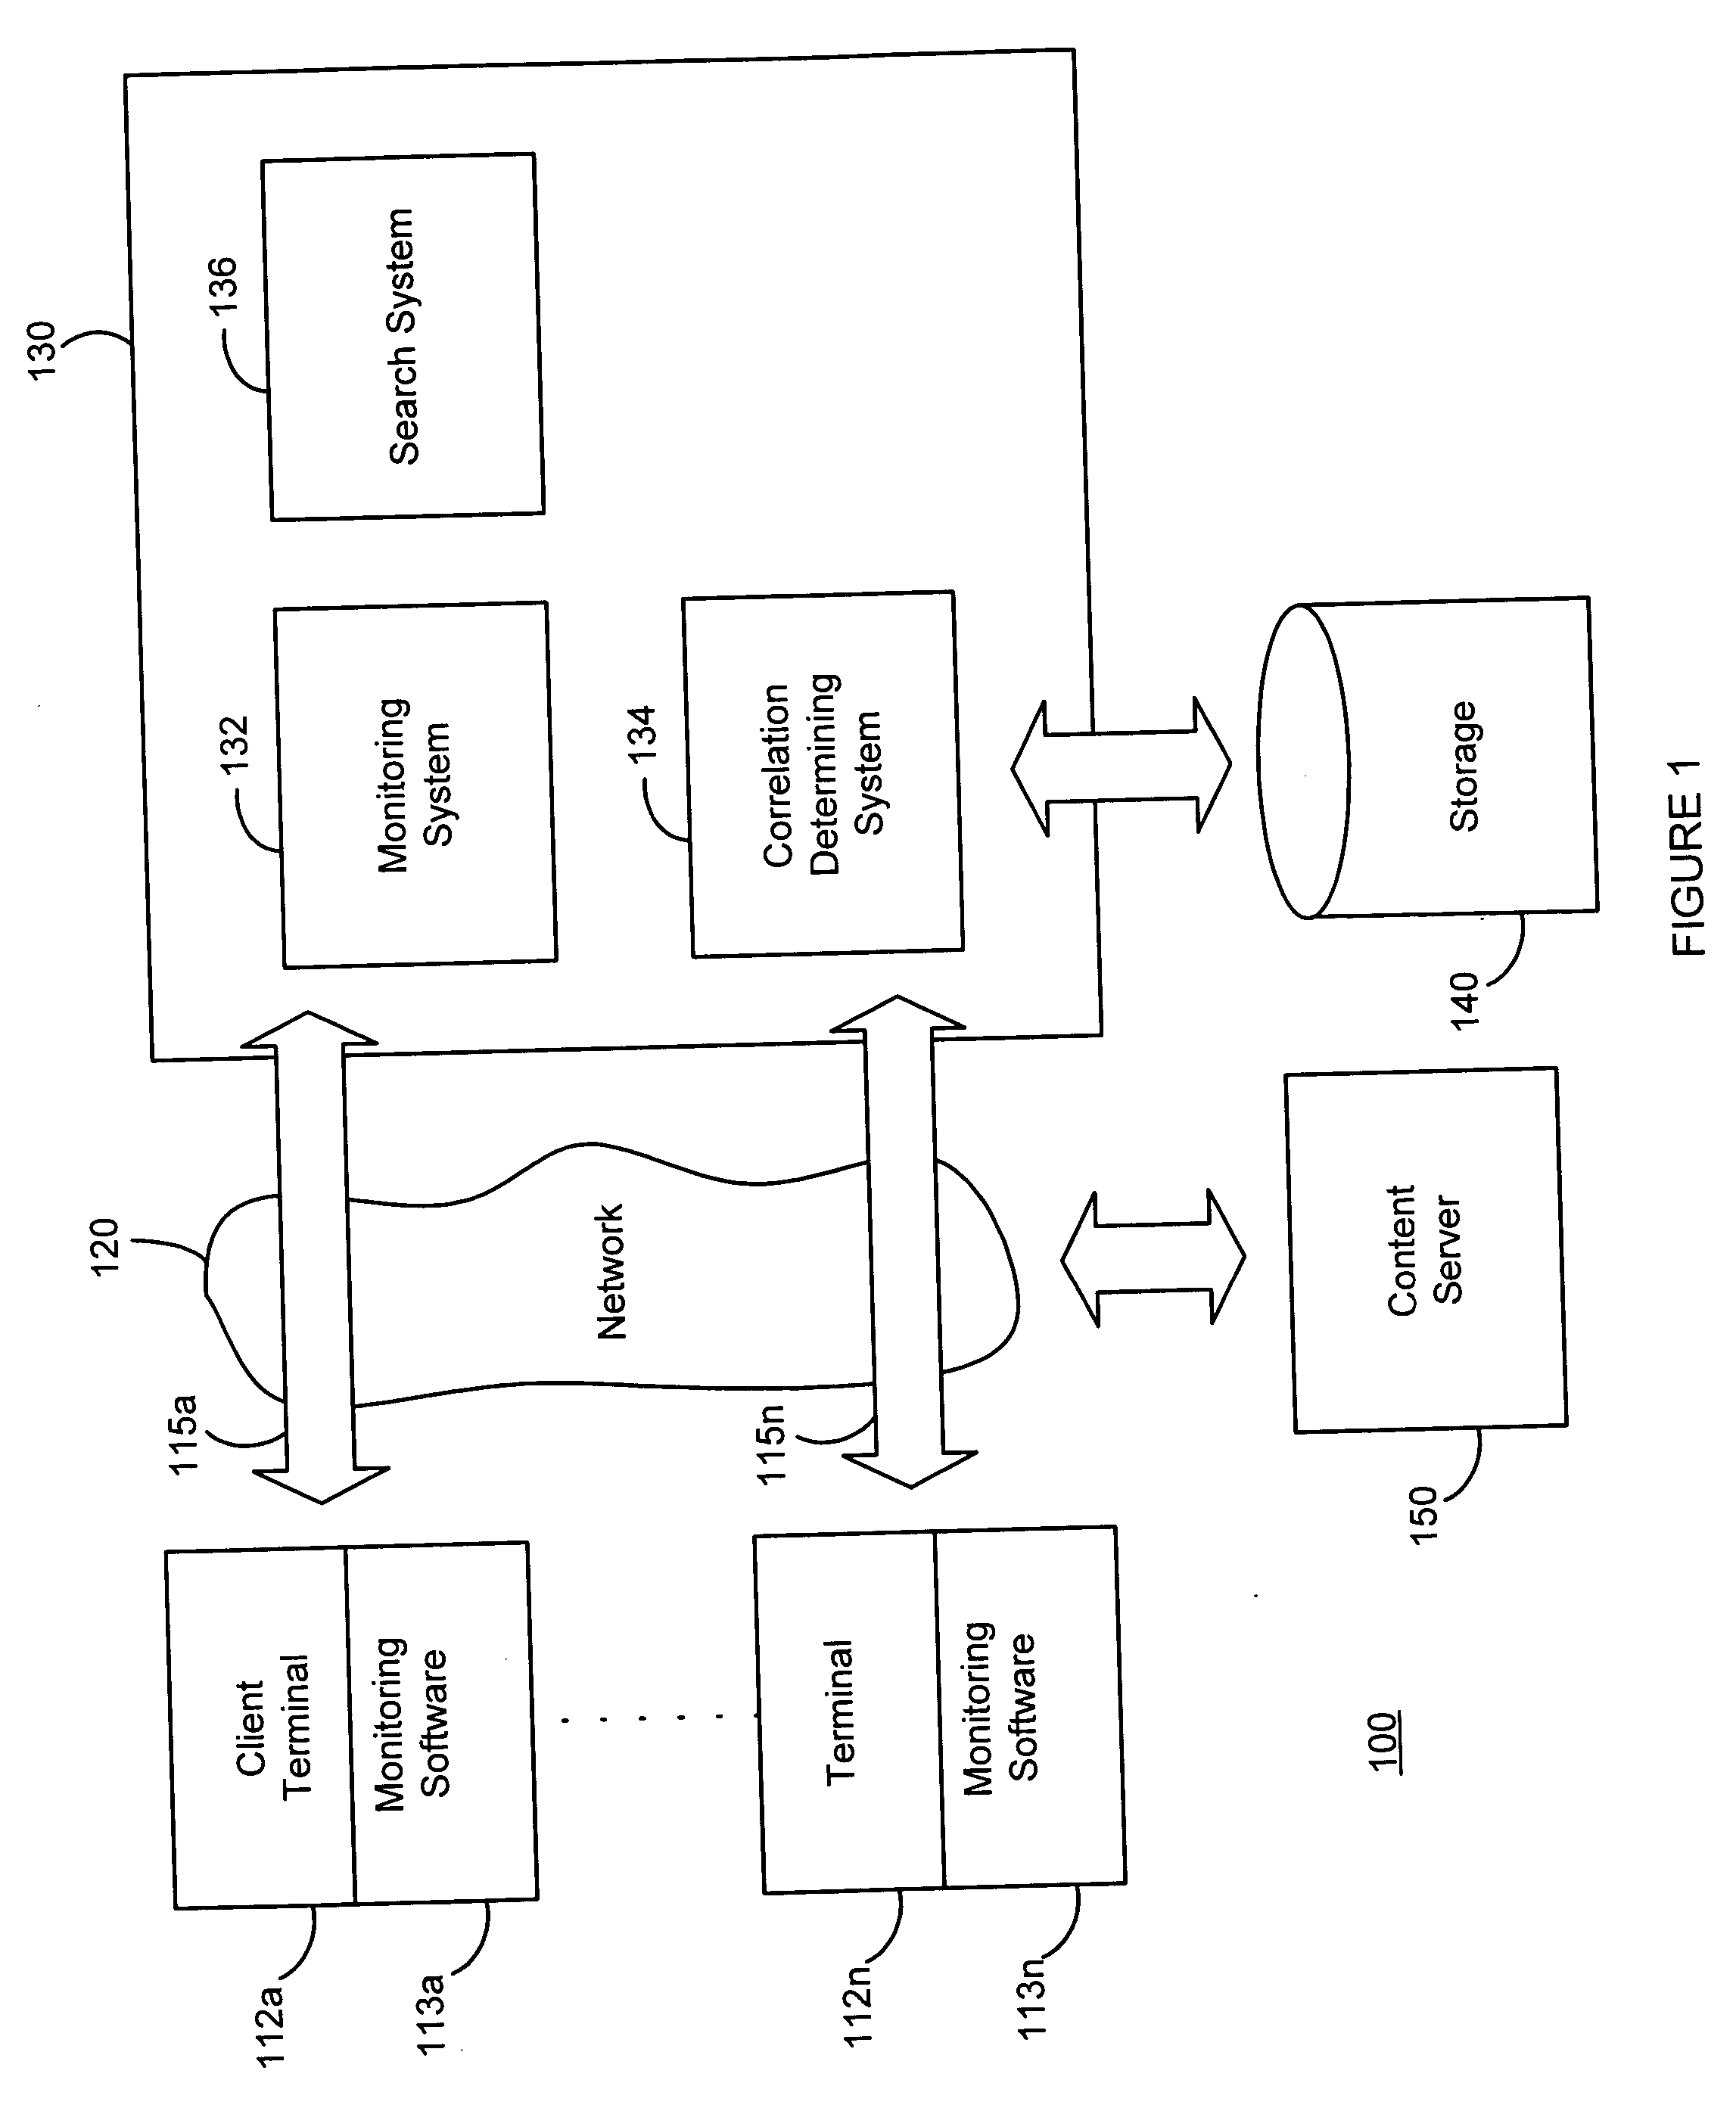 System and method of searching for information based on prior user actions